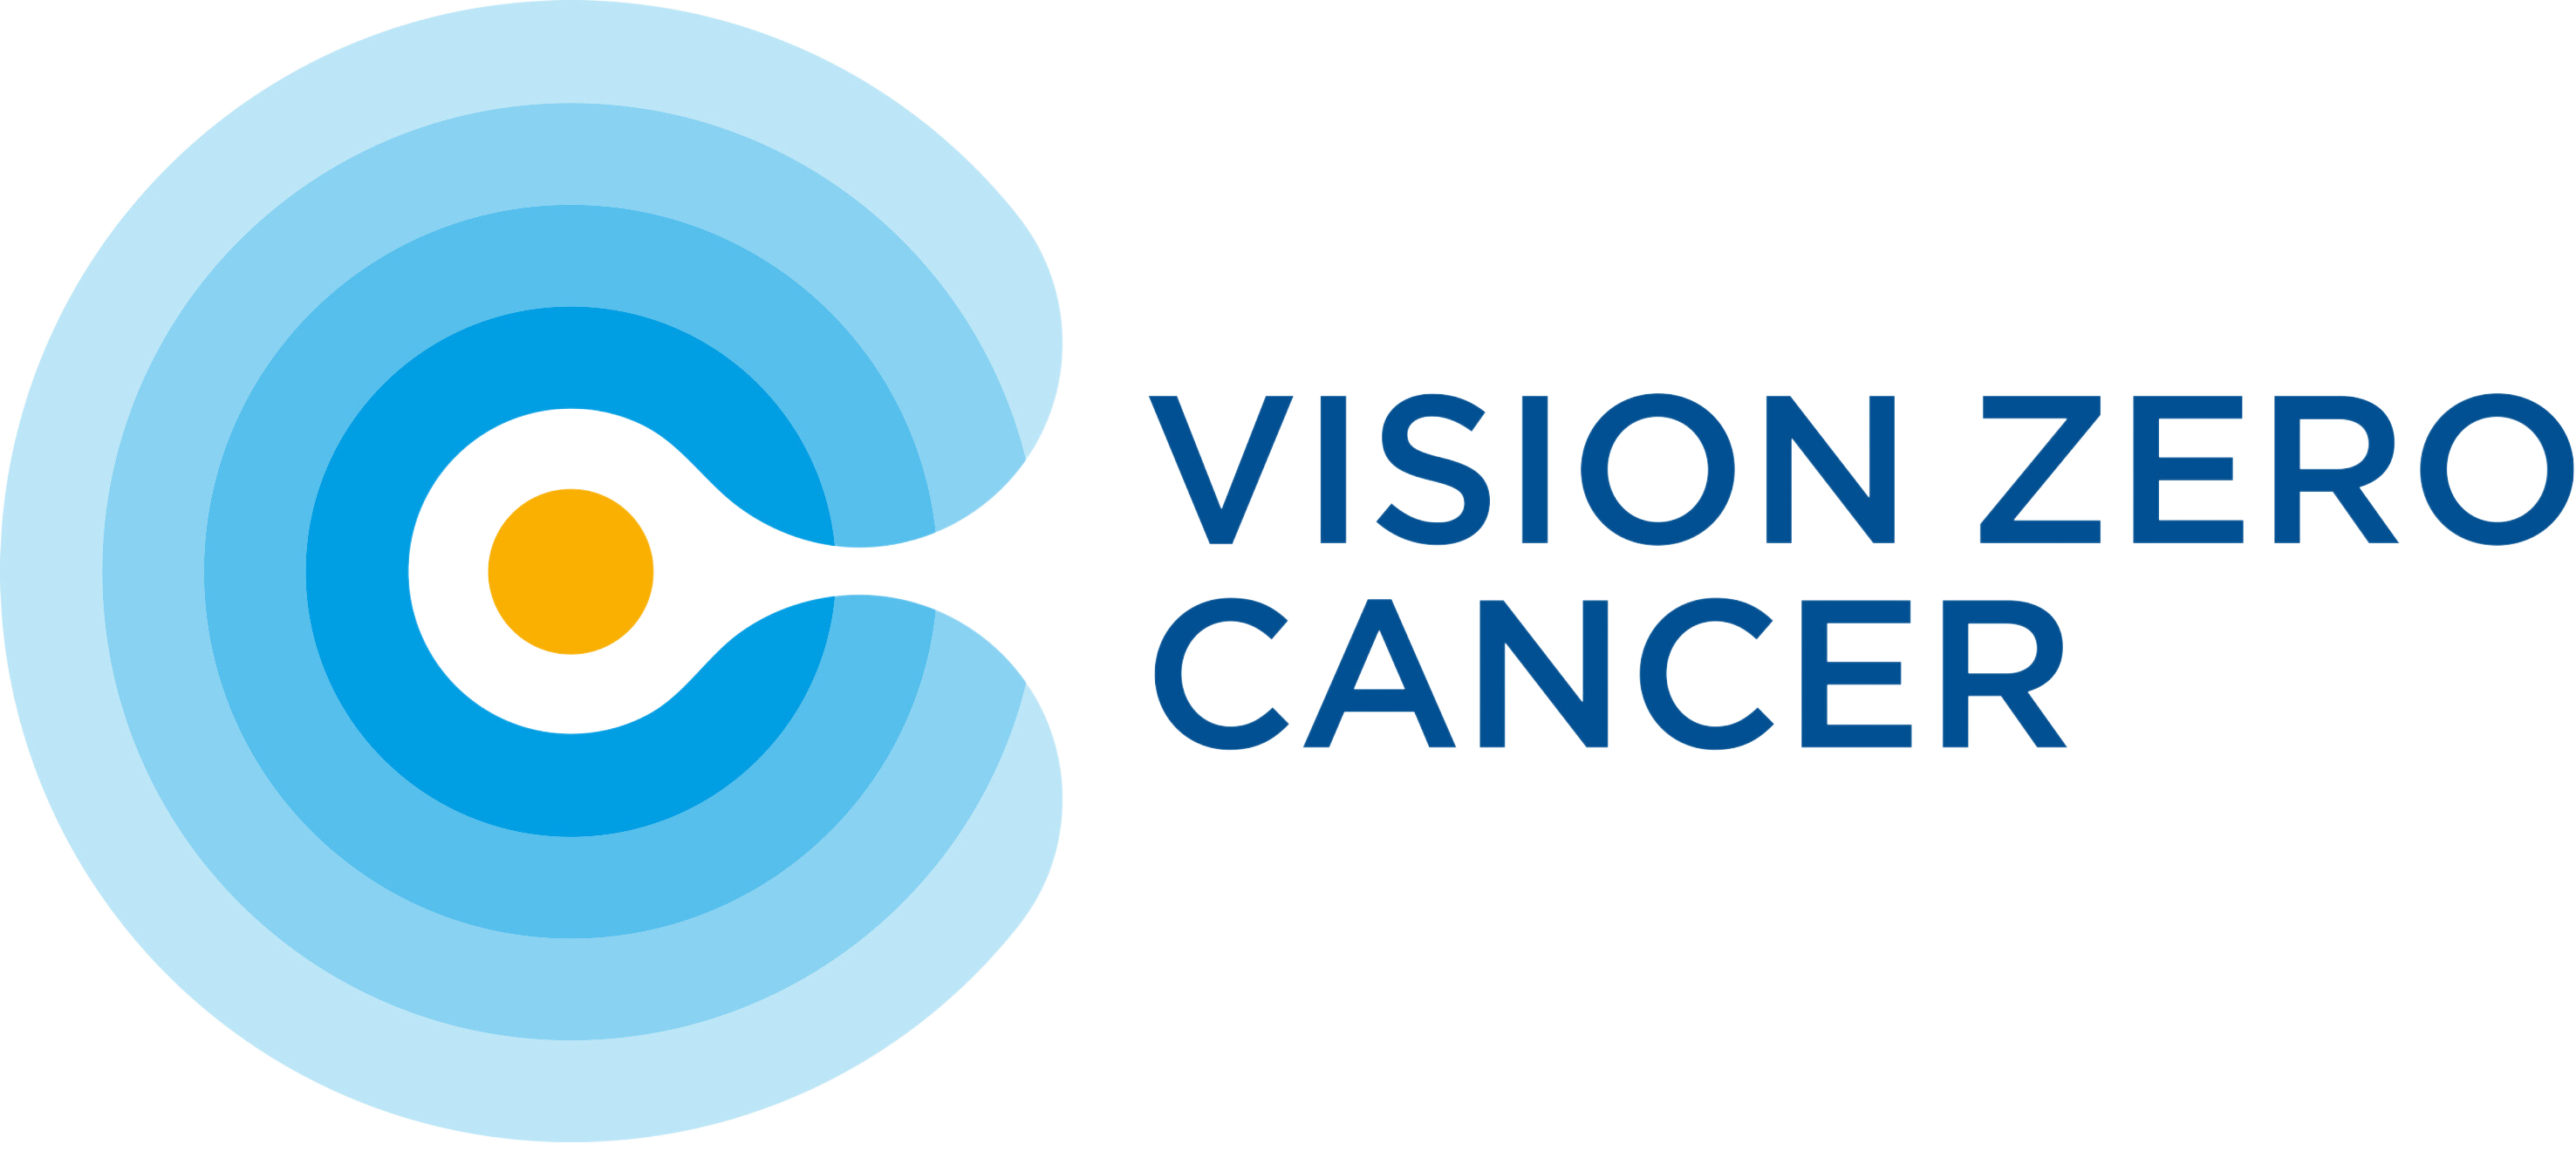 Stiftelsen Stockholm School of Economics Institute for Research (SIR), coordinator of the Vinnova-funded innovation milieus VISION ZERO CANCER and TESTBED SWEDEN PRECISION HEALTH CANCER